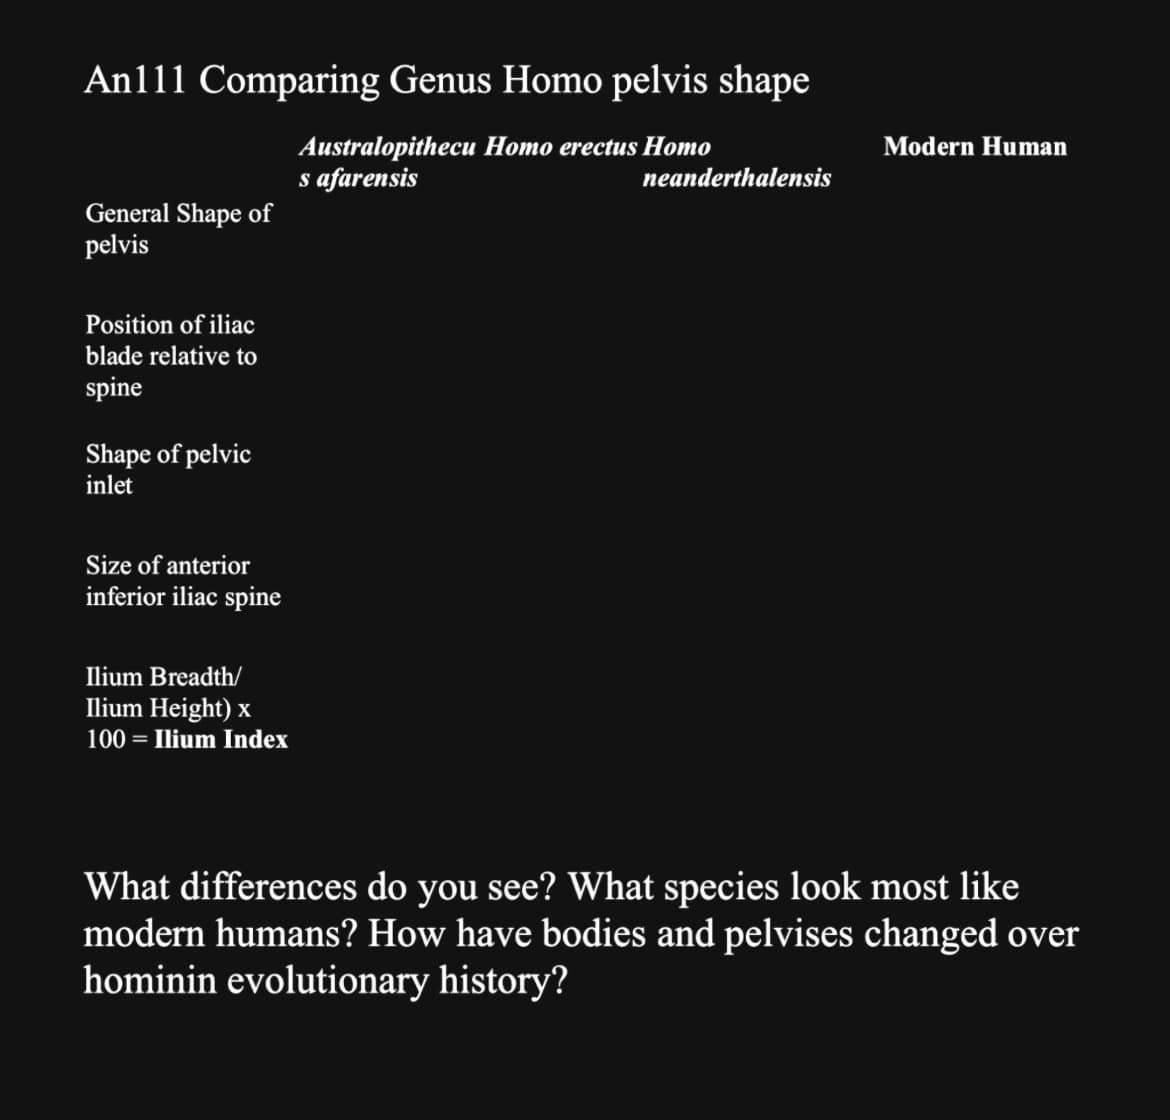 An111 Comparing Genus Homo pelvis shape
Australopithecu Homo erectus Homo
s afarensis
General Shape of
pelvis
Position of iliac
blade relative to
spine
Shape of pelvic
inlet
Size of anterior
inferior iliac spine
Ilium Breadth/
Ilium Height) x
100 Ilium Index
Modern Human
neanderthalensis
What differences do you see? What species look most like
modern humans? How have bodies and pelvises changed over
hominin evolutionary history?